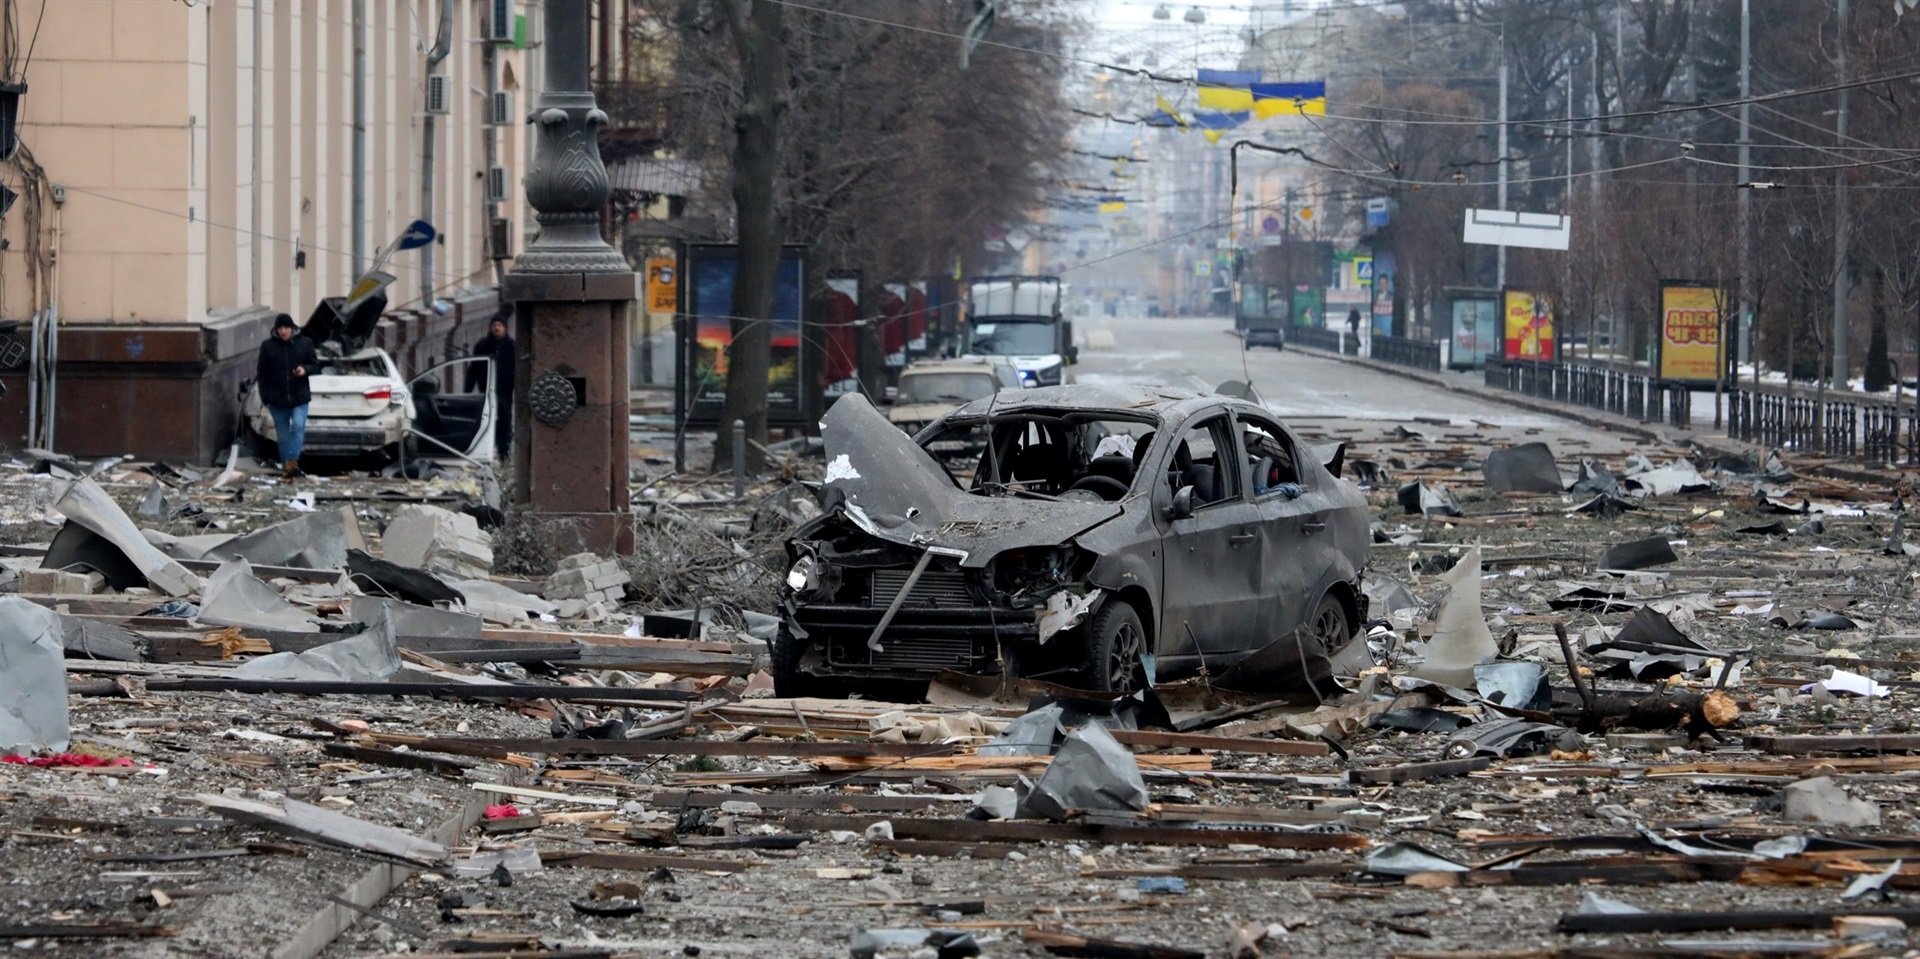 A burnt-out car is seen on the street after a missile launched by Russian invaders hit near the Kharkiv Regional State Administration building in Svobody (Freedom Square) on March 1, 2022, in Kharkiv, Ukraine.